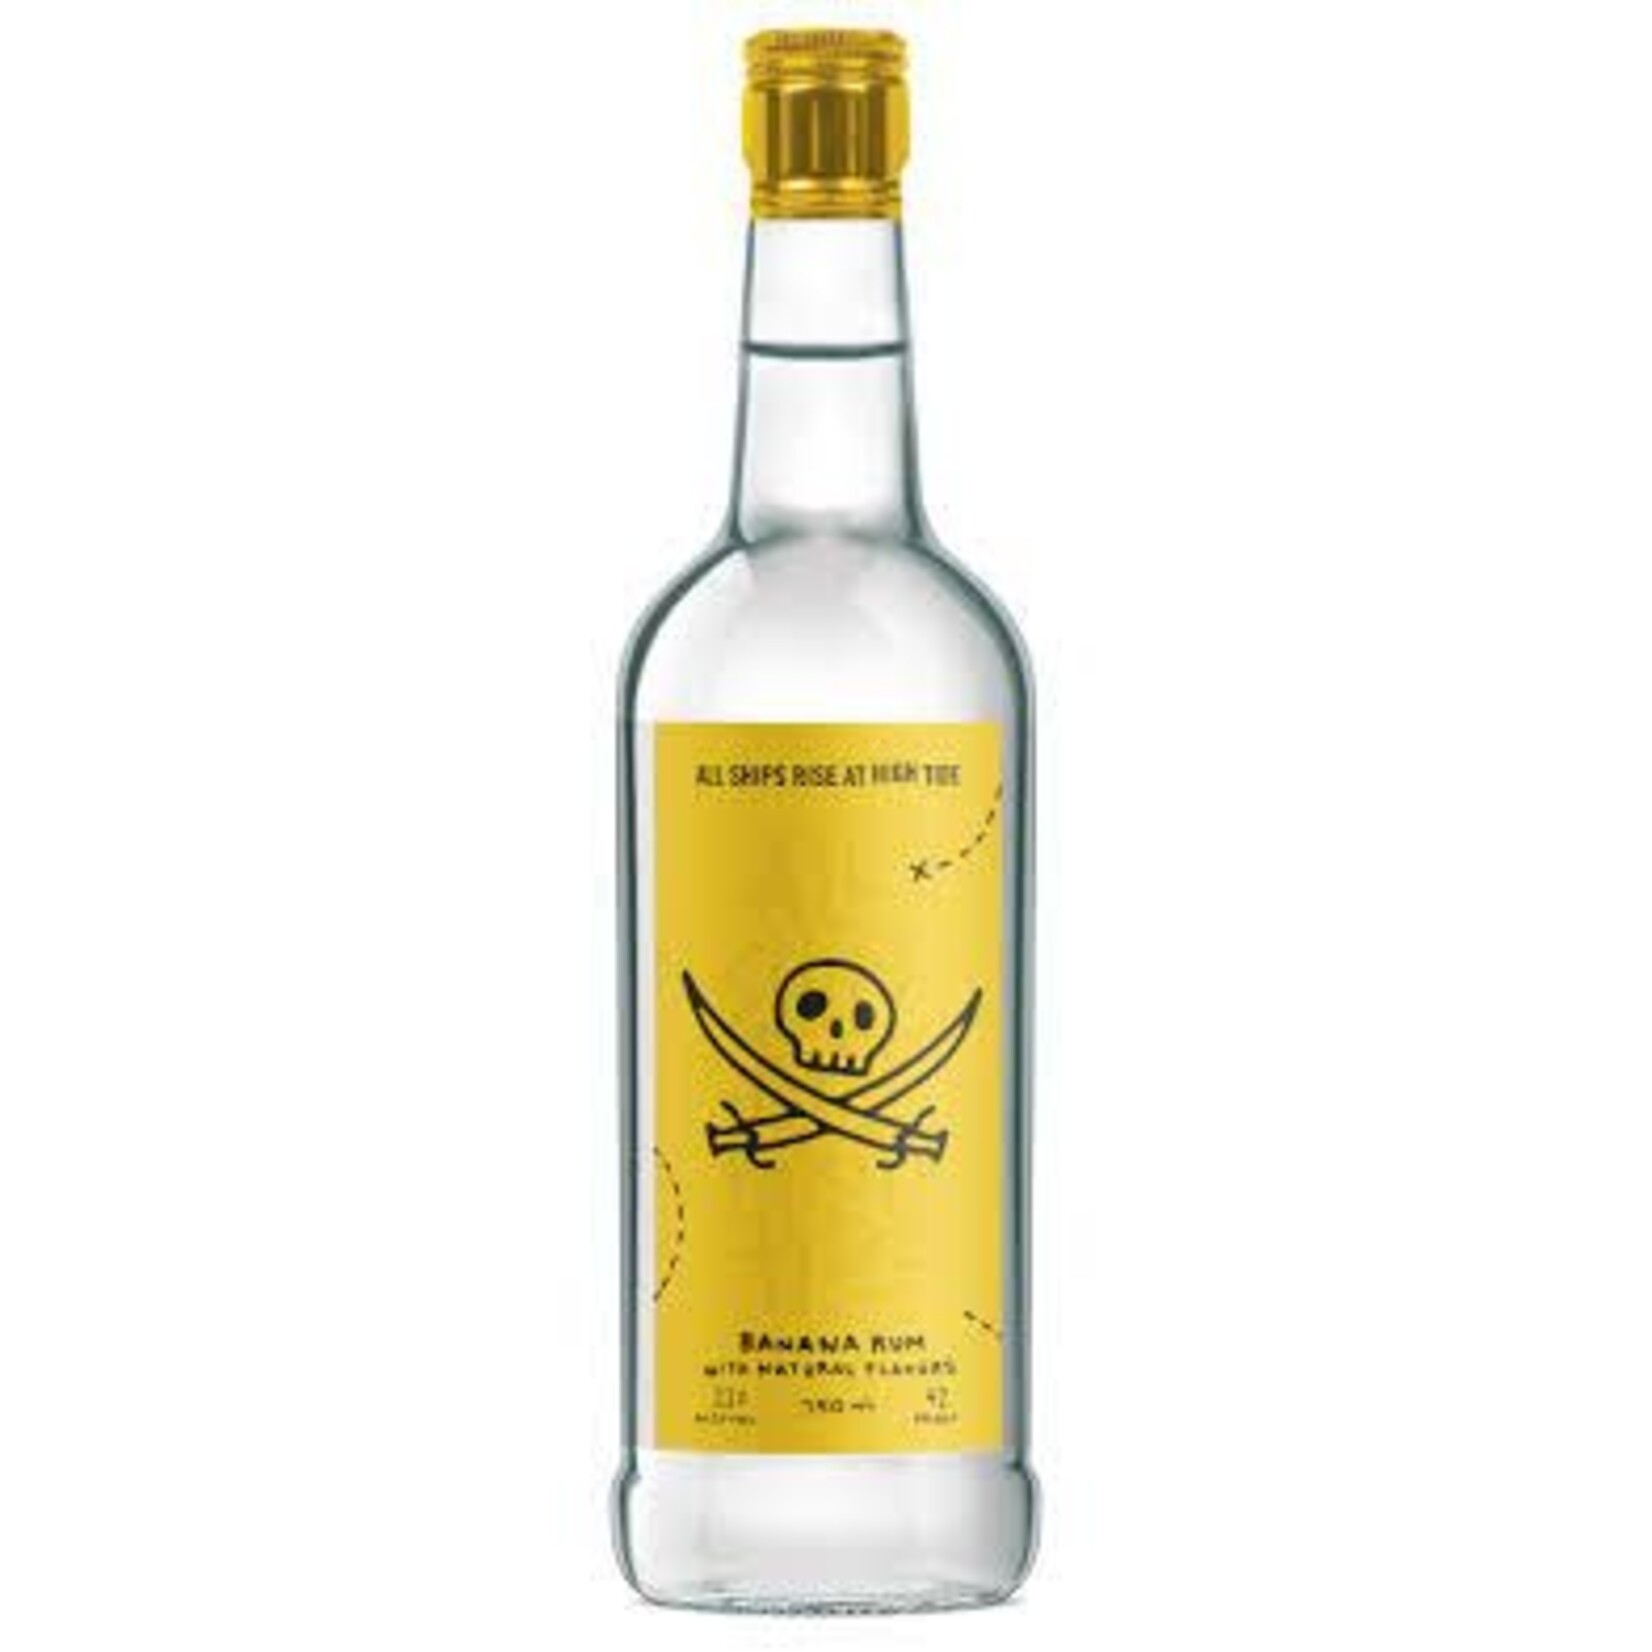 All Ships Banana Flavored Rum 42Proof 750ml